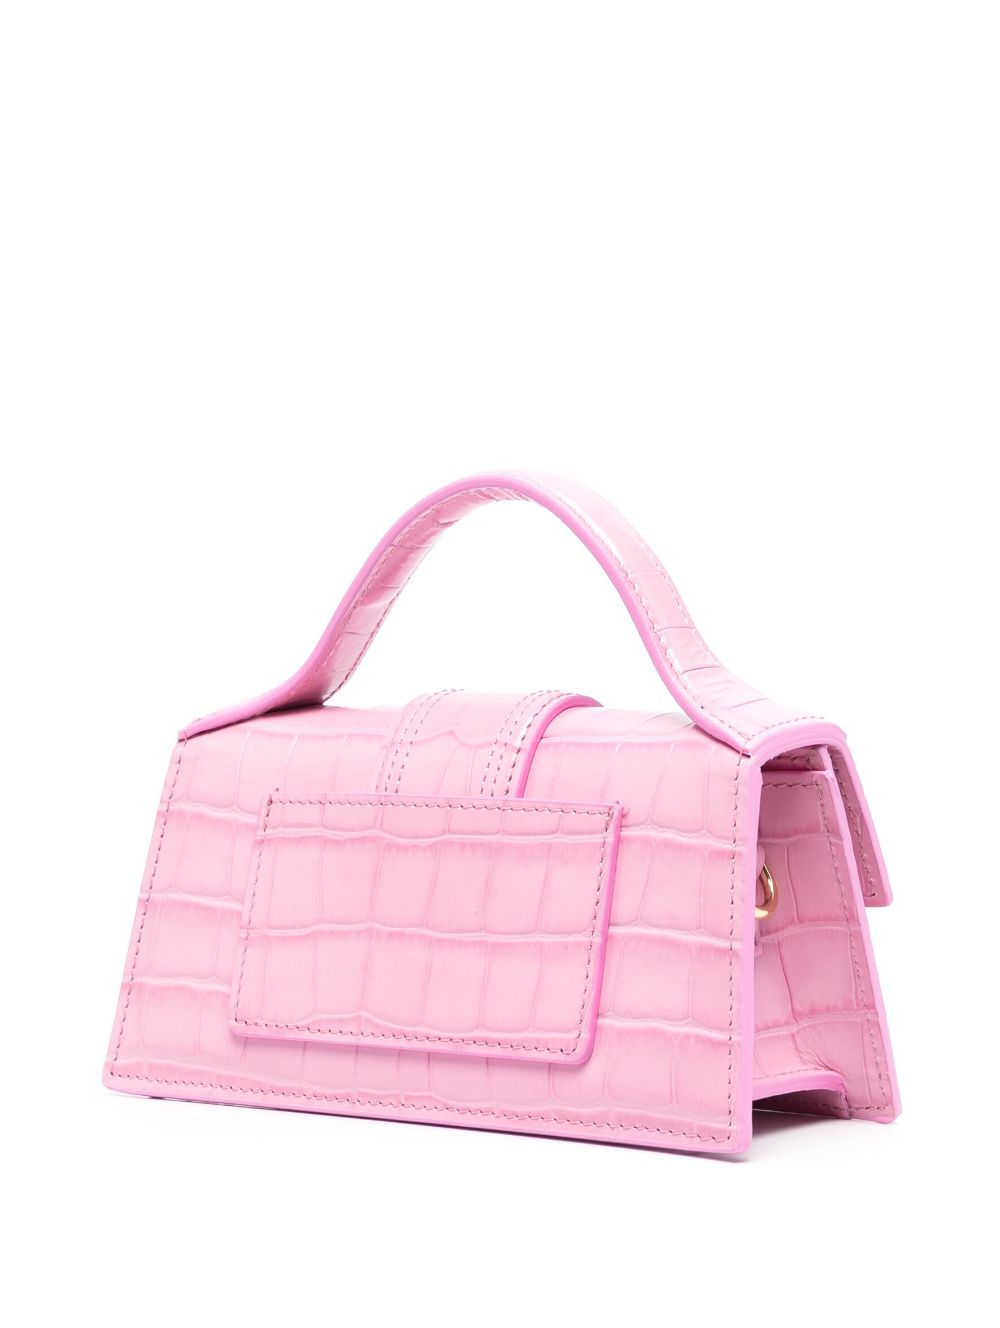 Jacquemus Le Petit Riviera Croc Embo Leather Bag In Fuchsia,pink